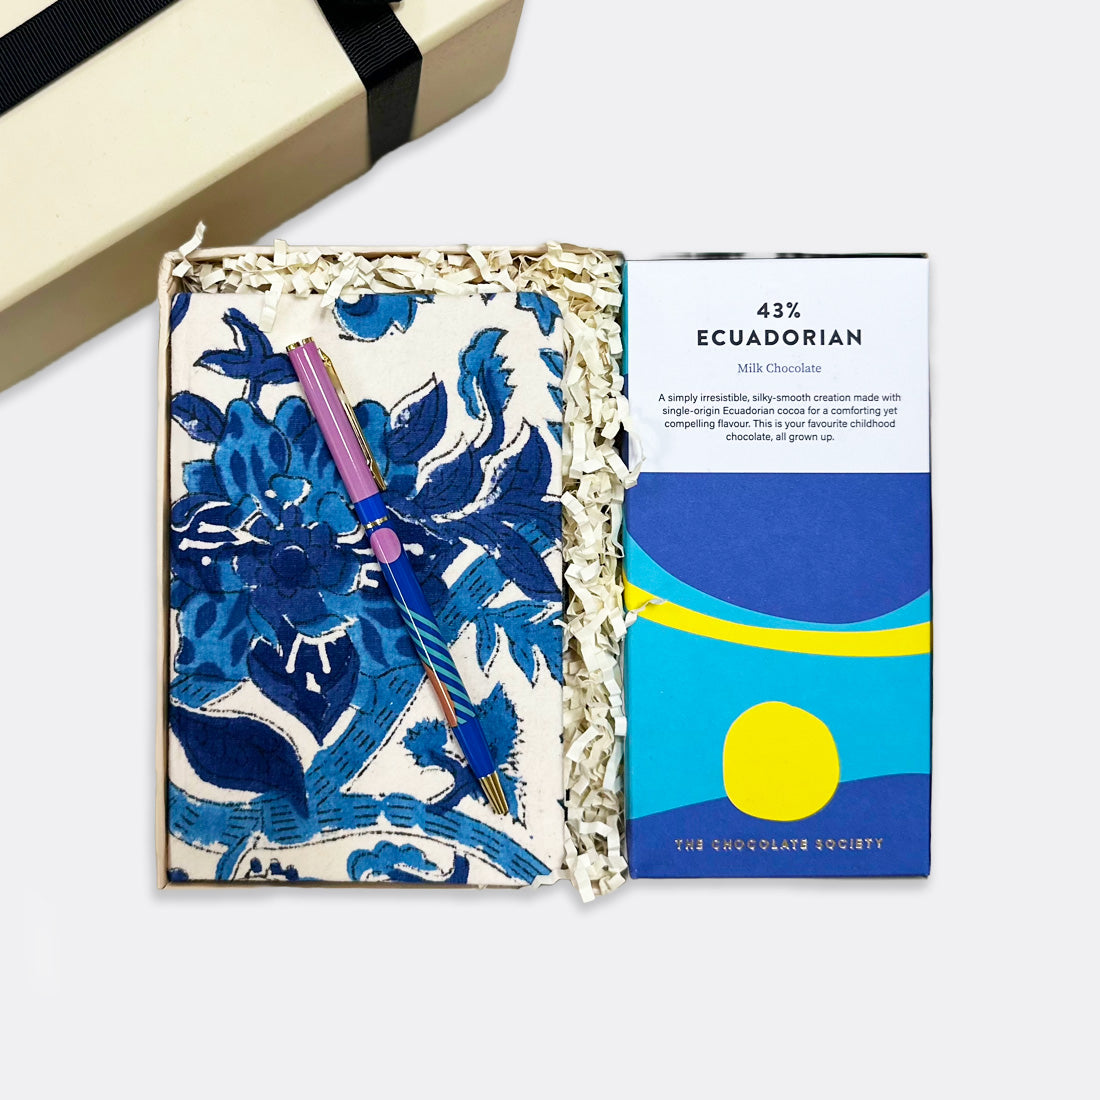 Ecuadorian Milk Chocolate Bar Floral Cotton Journal | Blue Abstract Pen, shop the best Christmas gift gifts for her for him from Inna carton online store dubai, UAE!